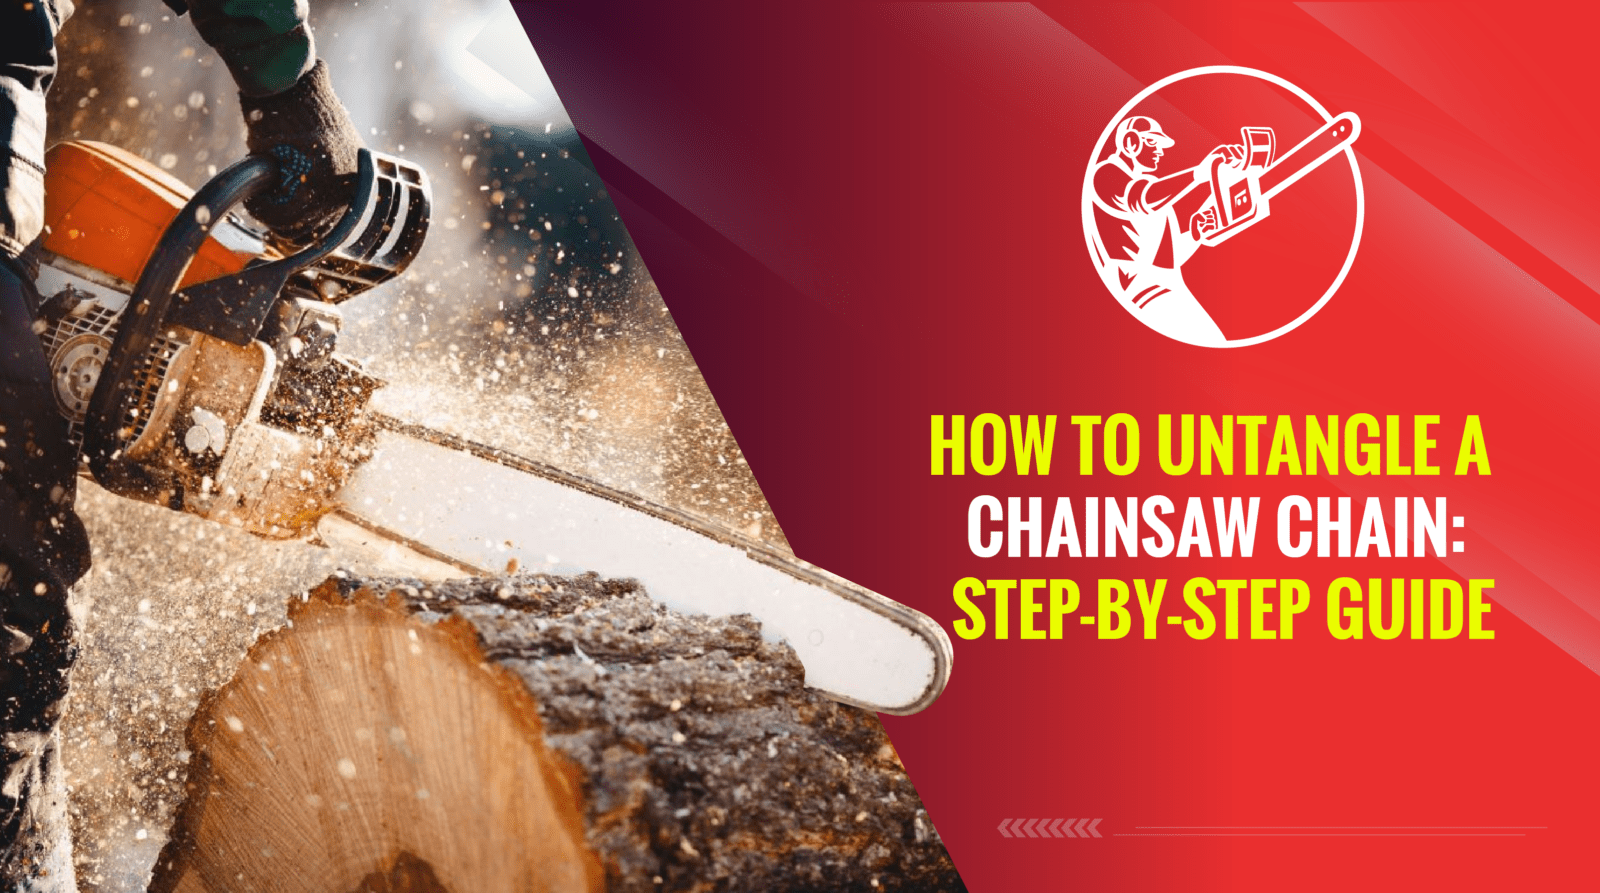 How to Untangle a Chainsaw Chain Step-by-Step Guide